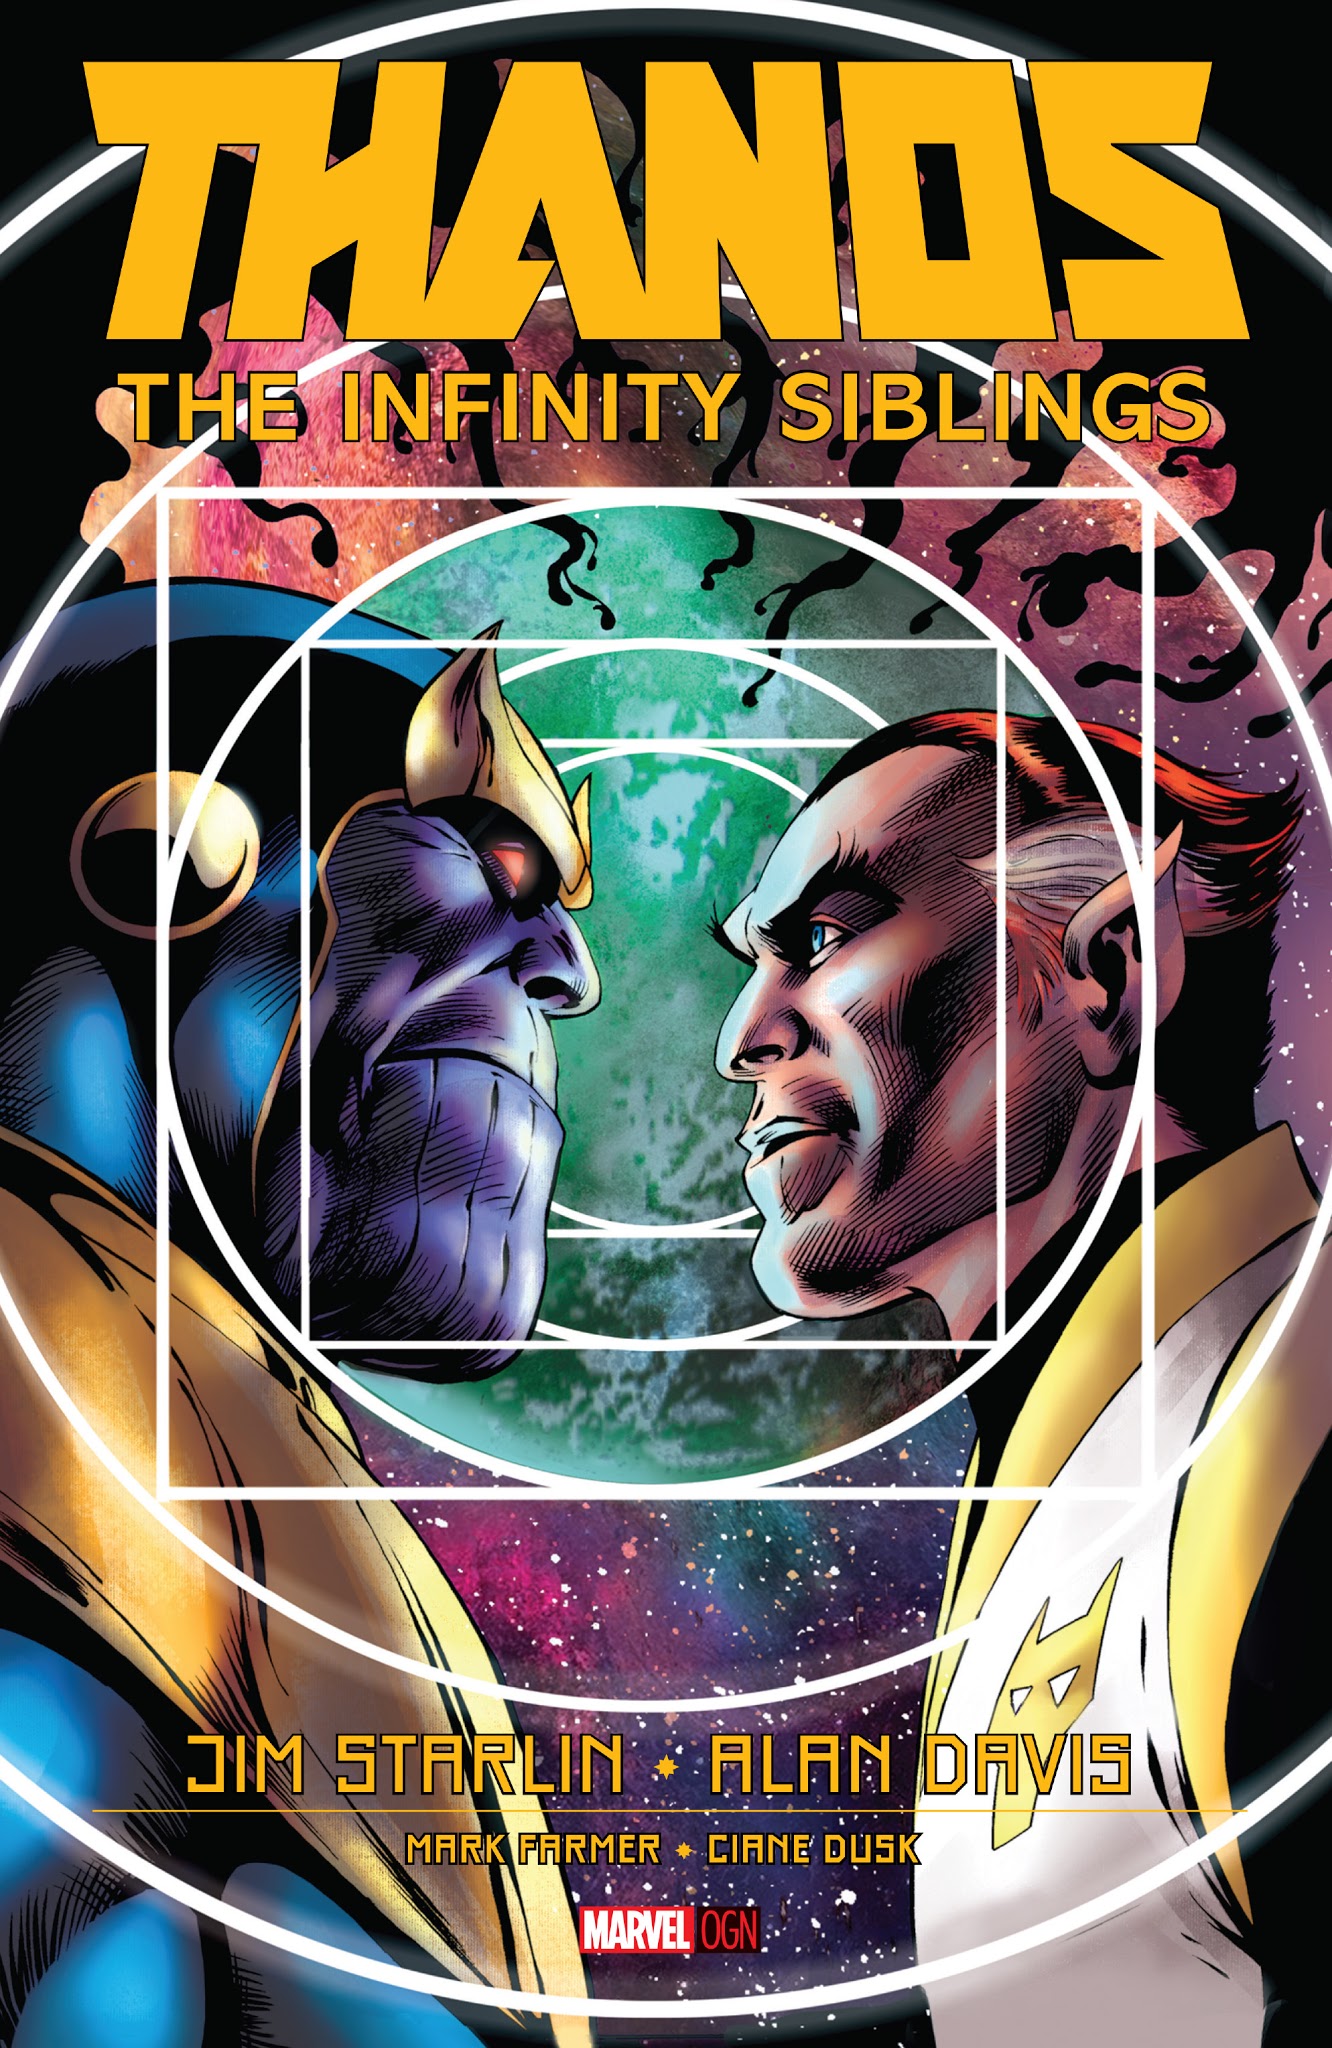 Read online Thanos: The Infinity Siblings comic -  Issue # TPB - 1